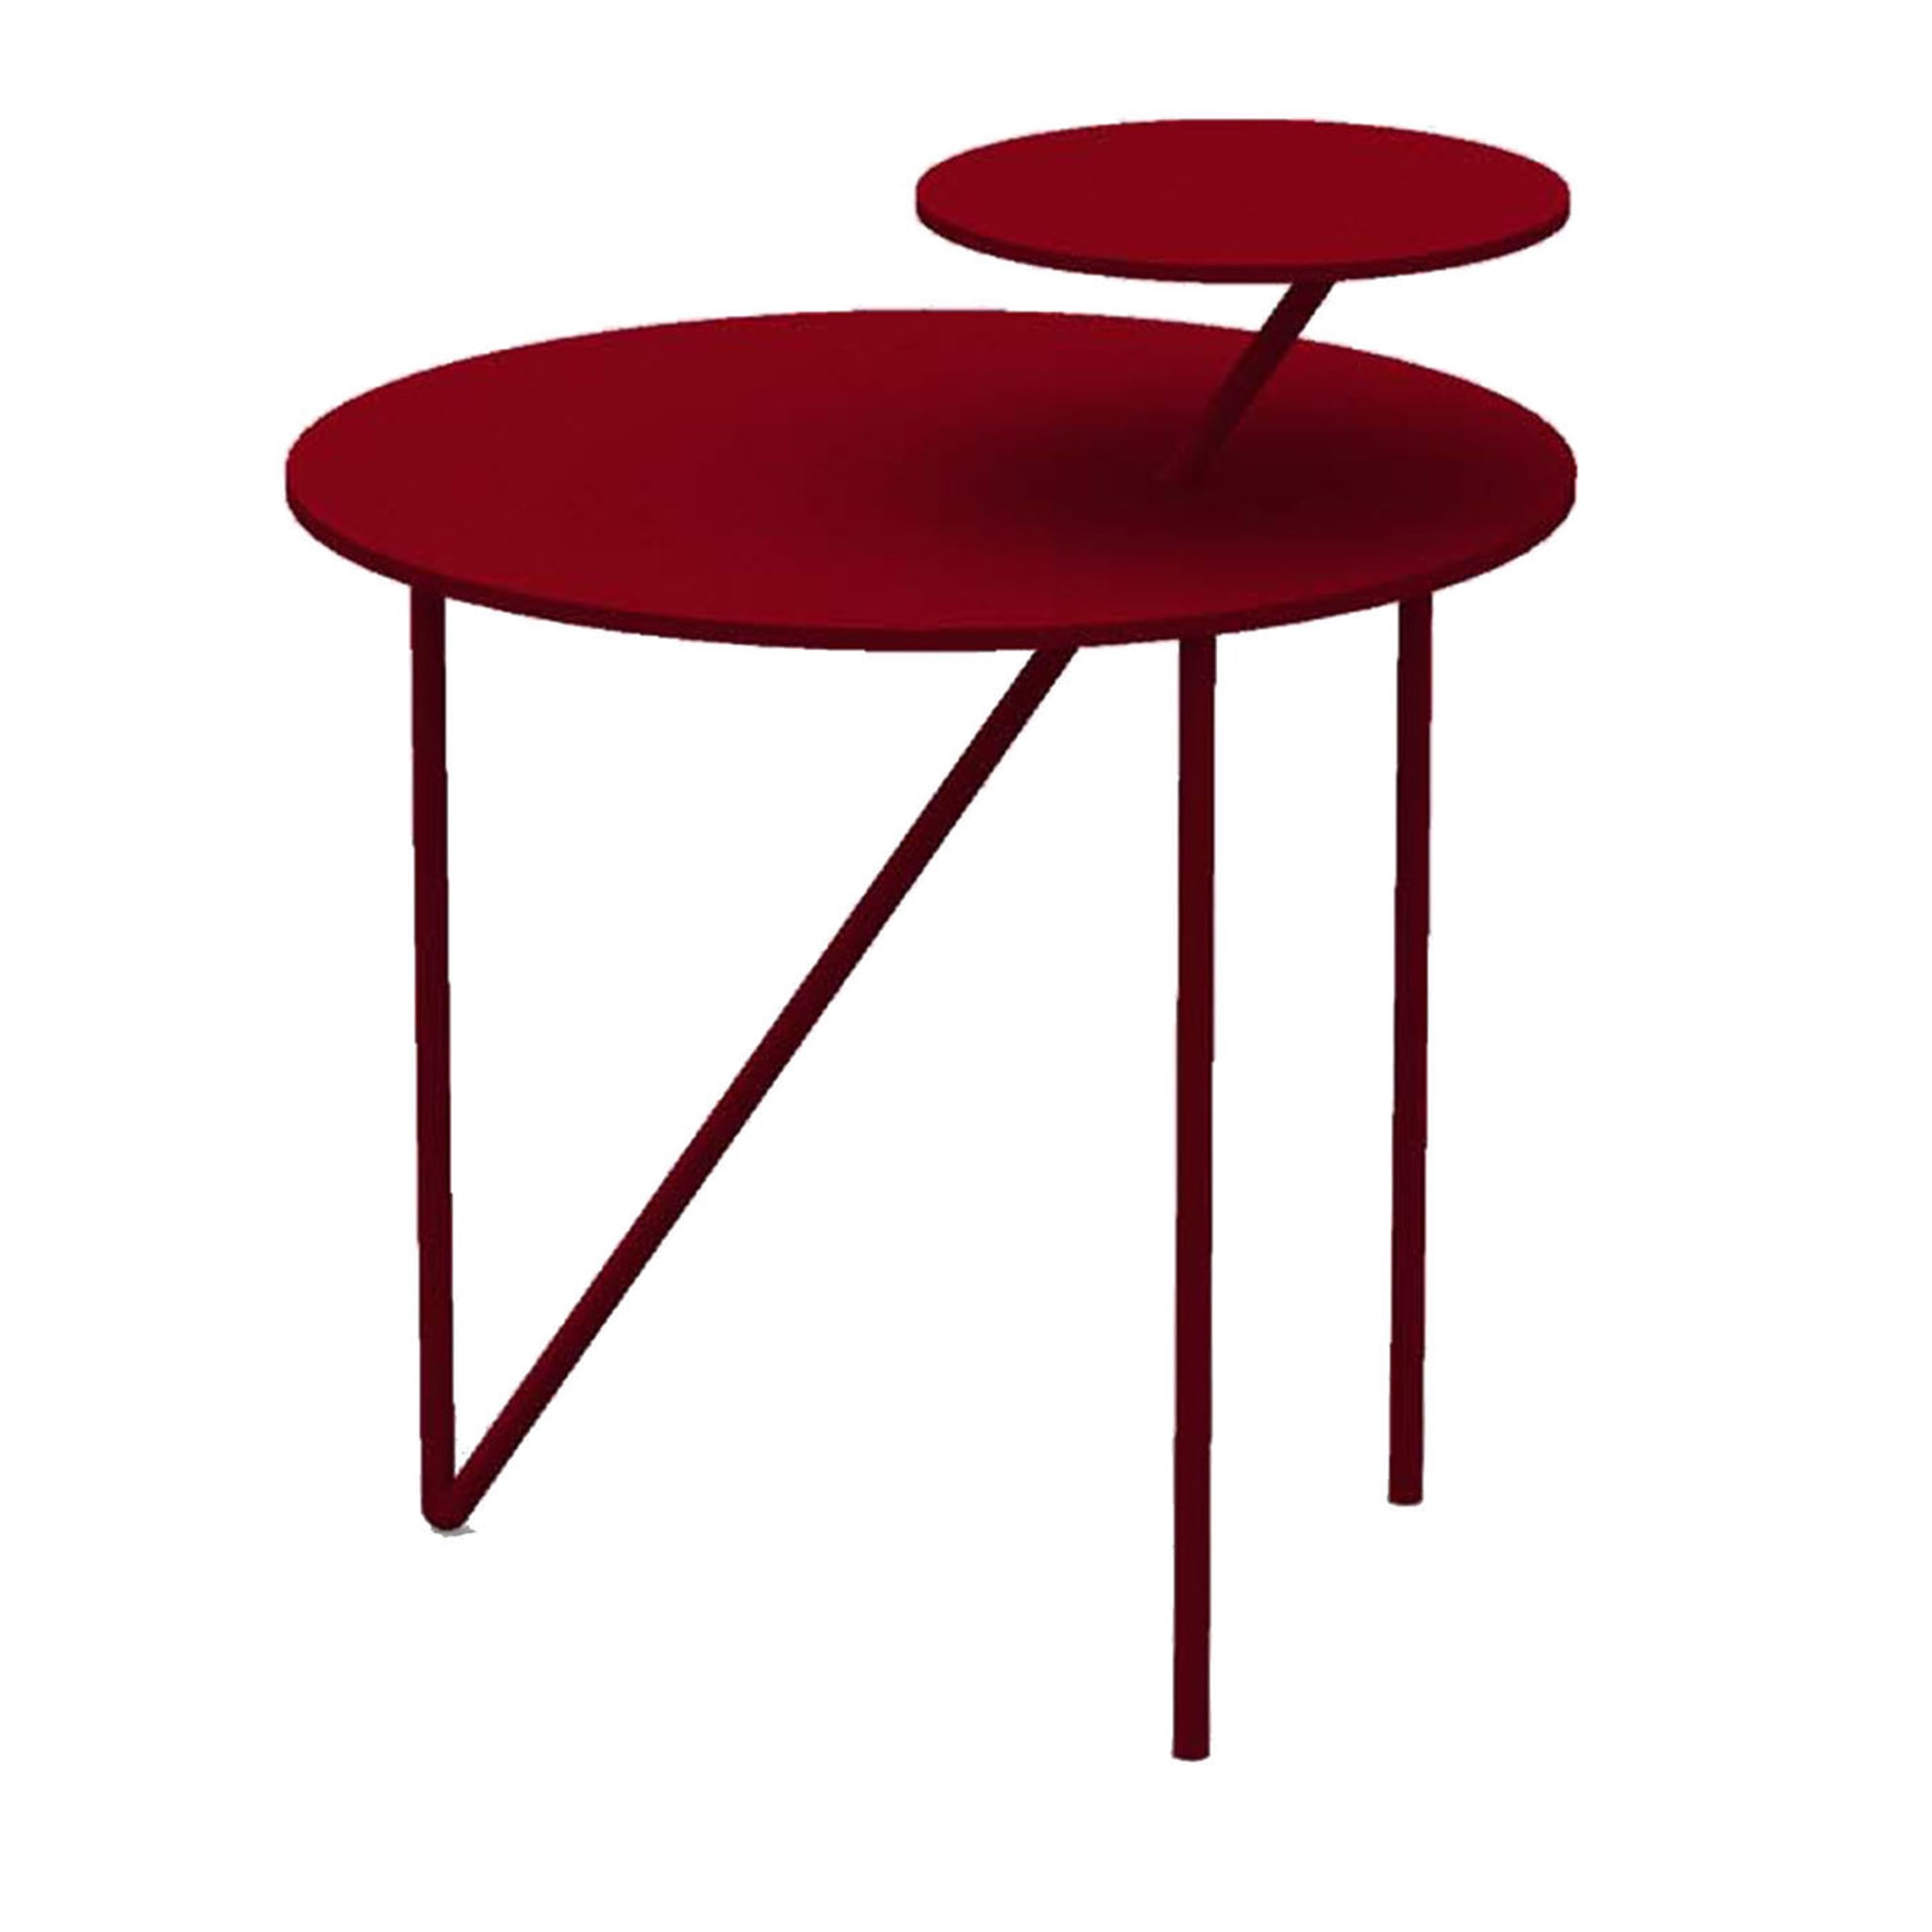 Passante Low Ruby Red Coffee Table - Alternative view 1